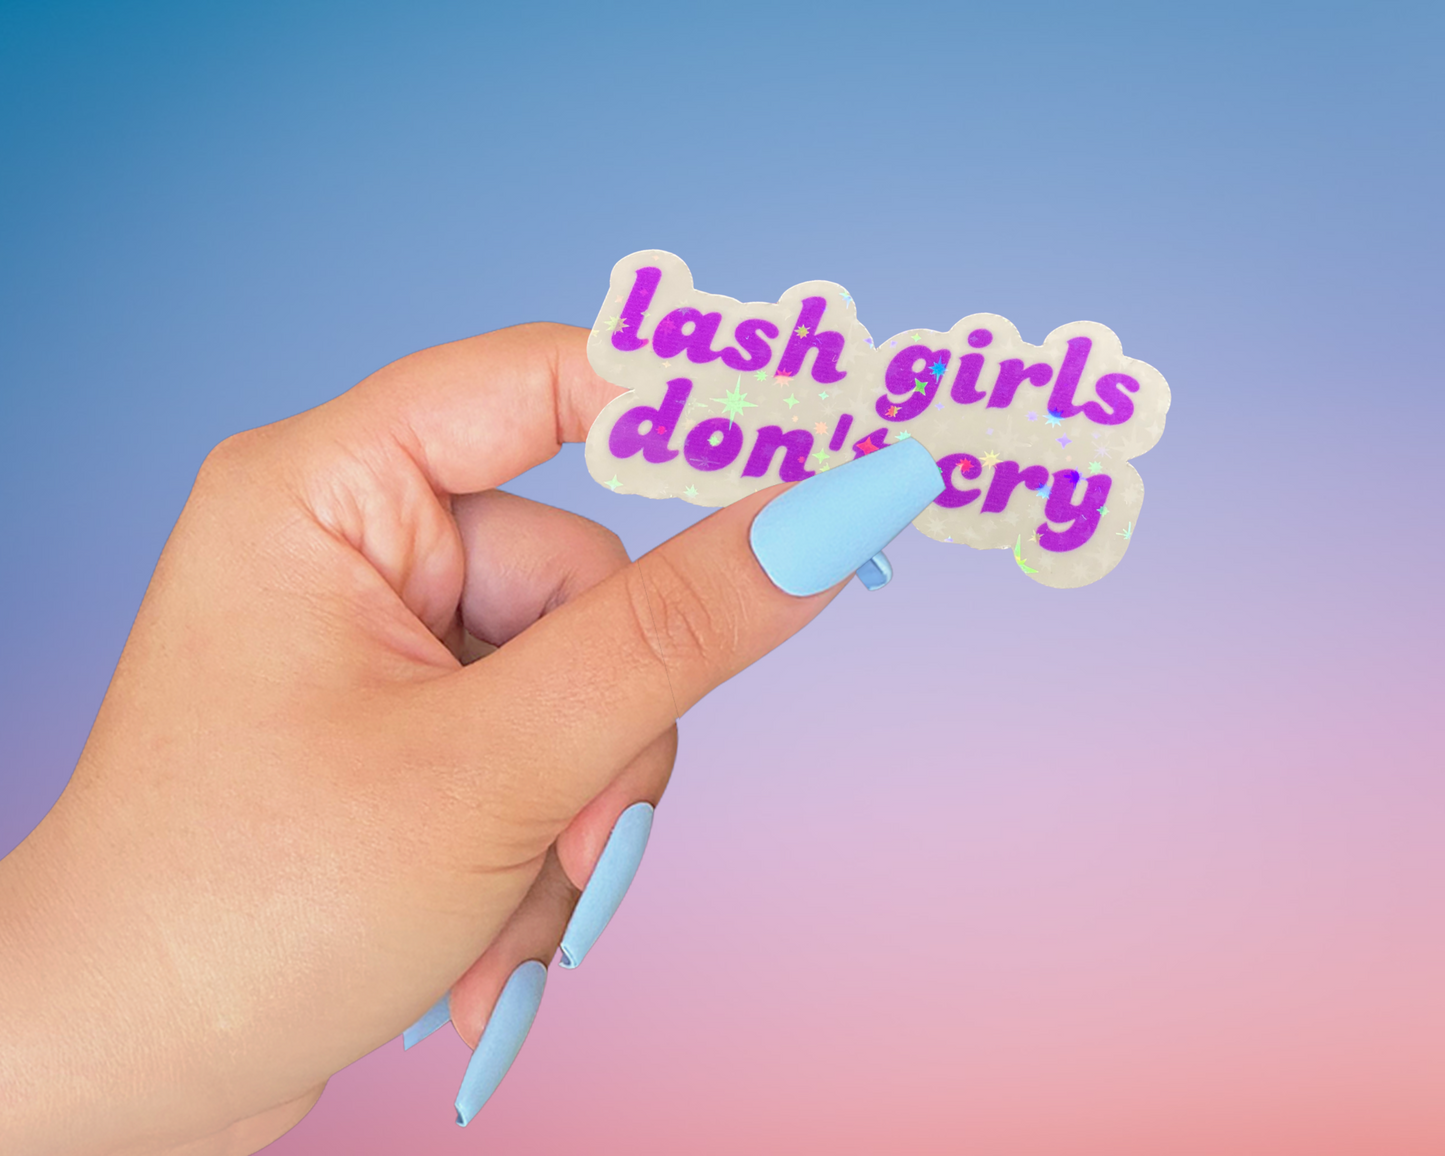 STICKER - LASH GIRLS DON’T CRY | 2.5 x 1” | WATERPROOF | HOLOGRAPHIC | PRICE FOR 1 STICKER